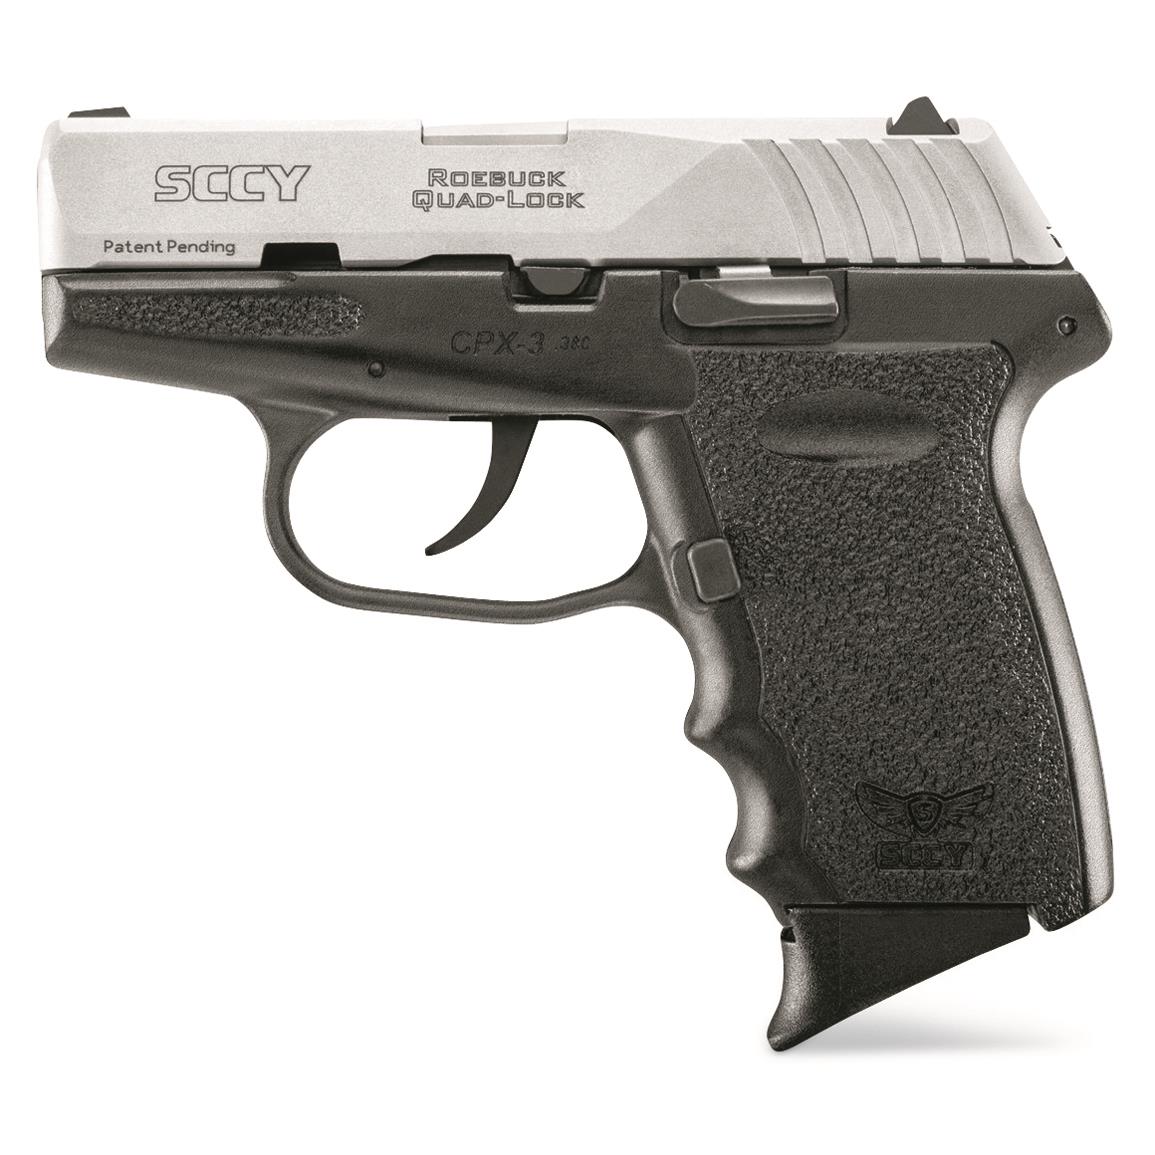 SCCY CPX-3, Semi-automatic, .380 ACP, 2.96" Barrel, Two-tone, 10+1 Rounds